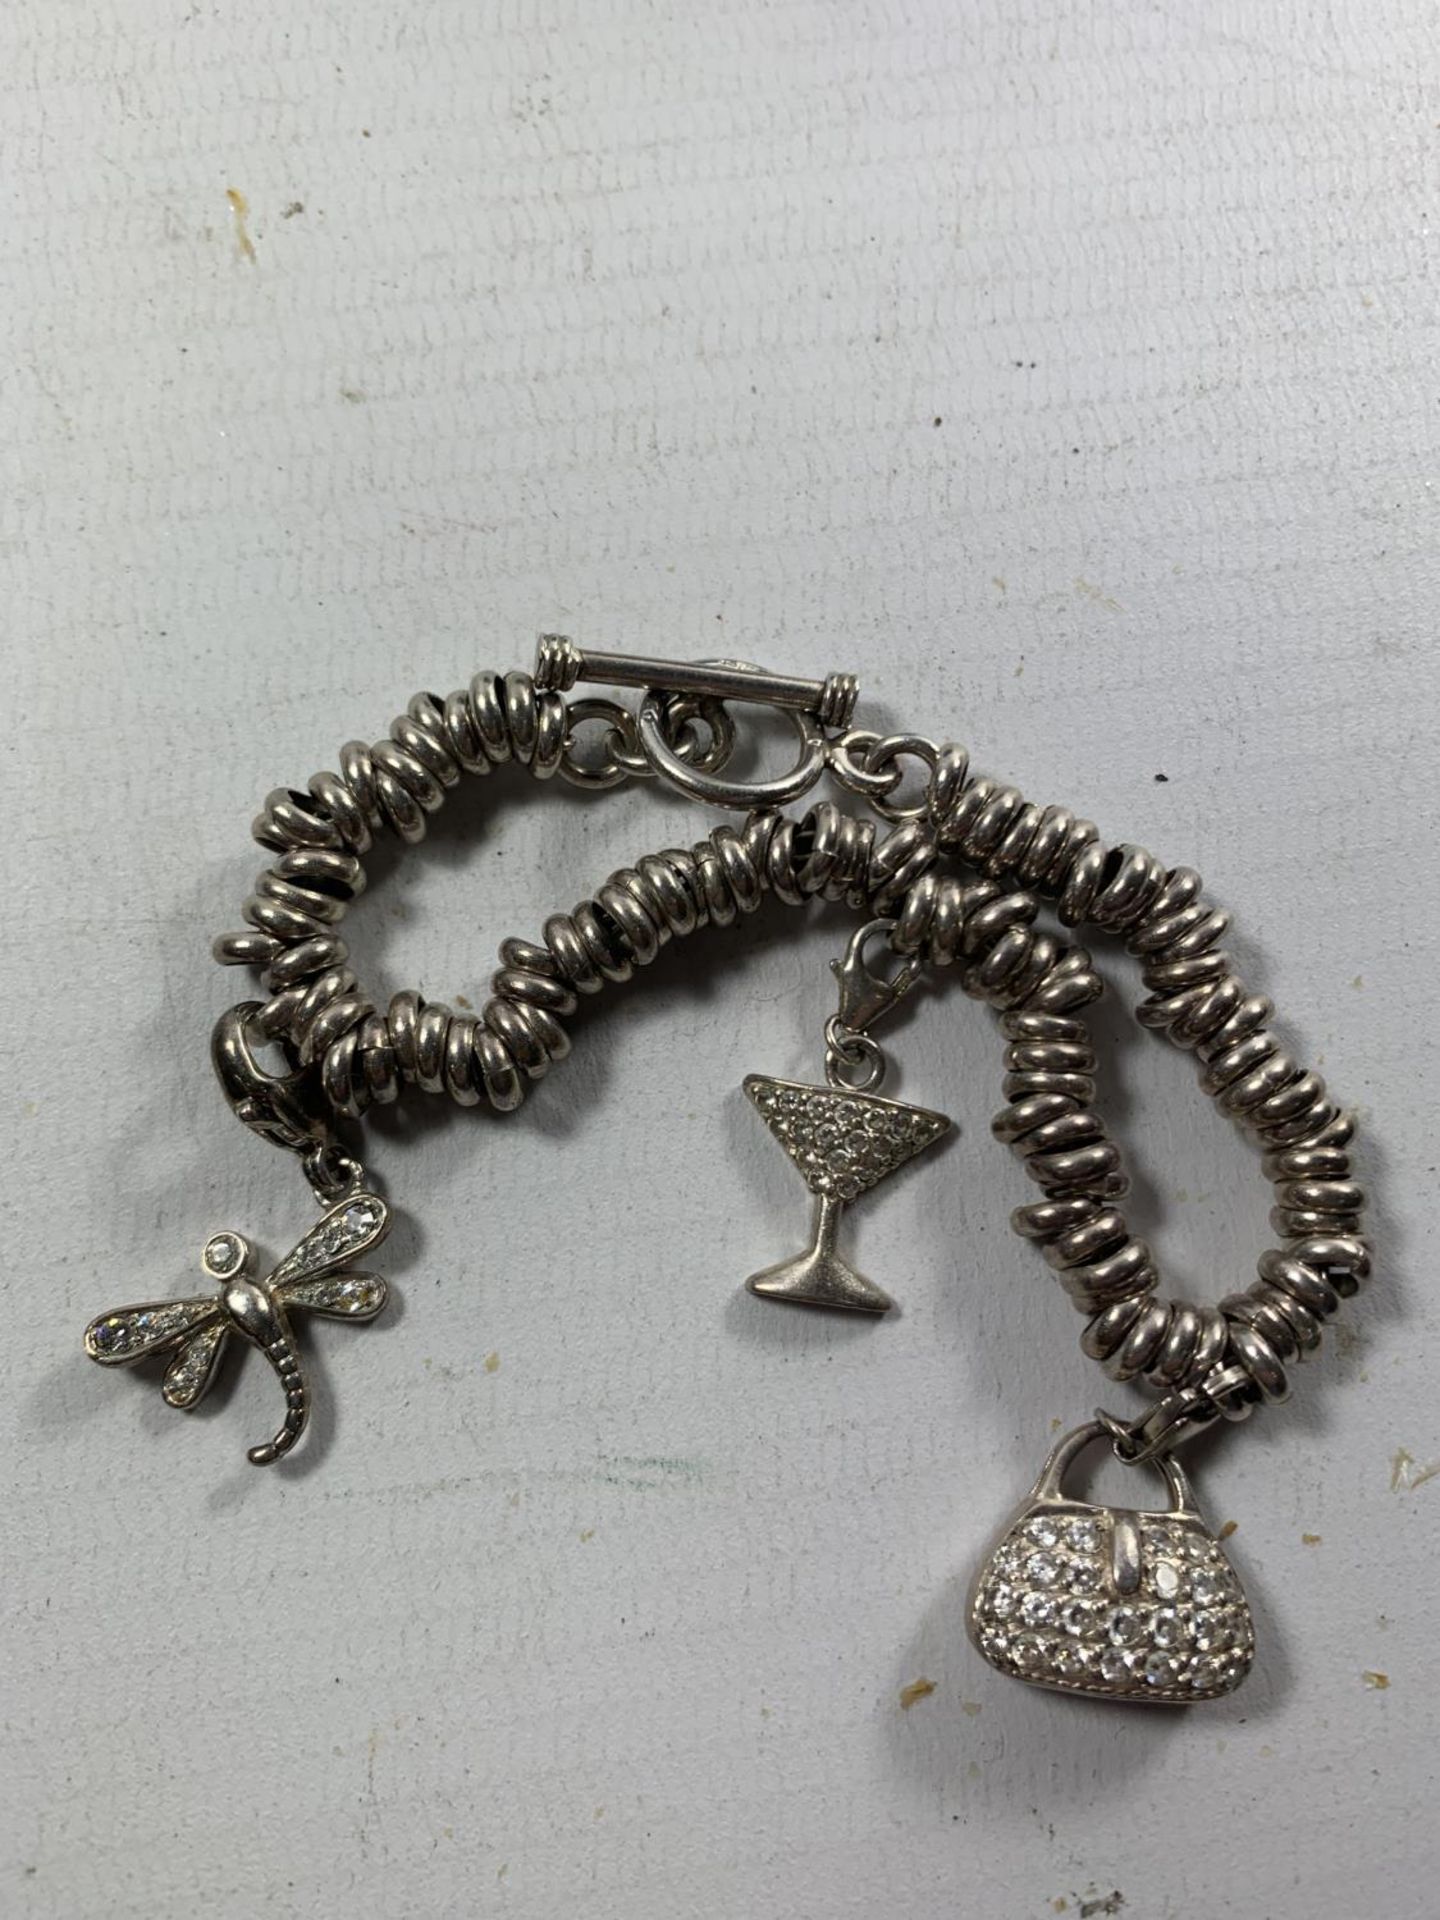 A SILVER SWEETY BRACELET WITH THREE CHARMS - Image 2 of 2